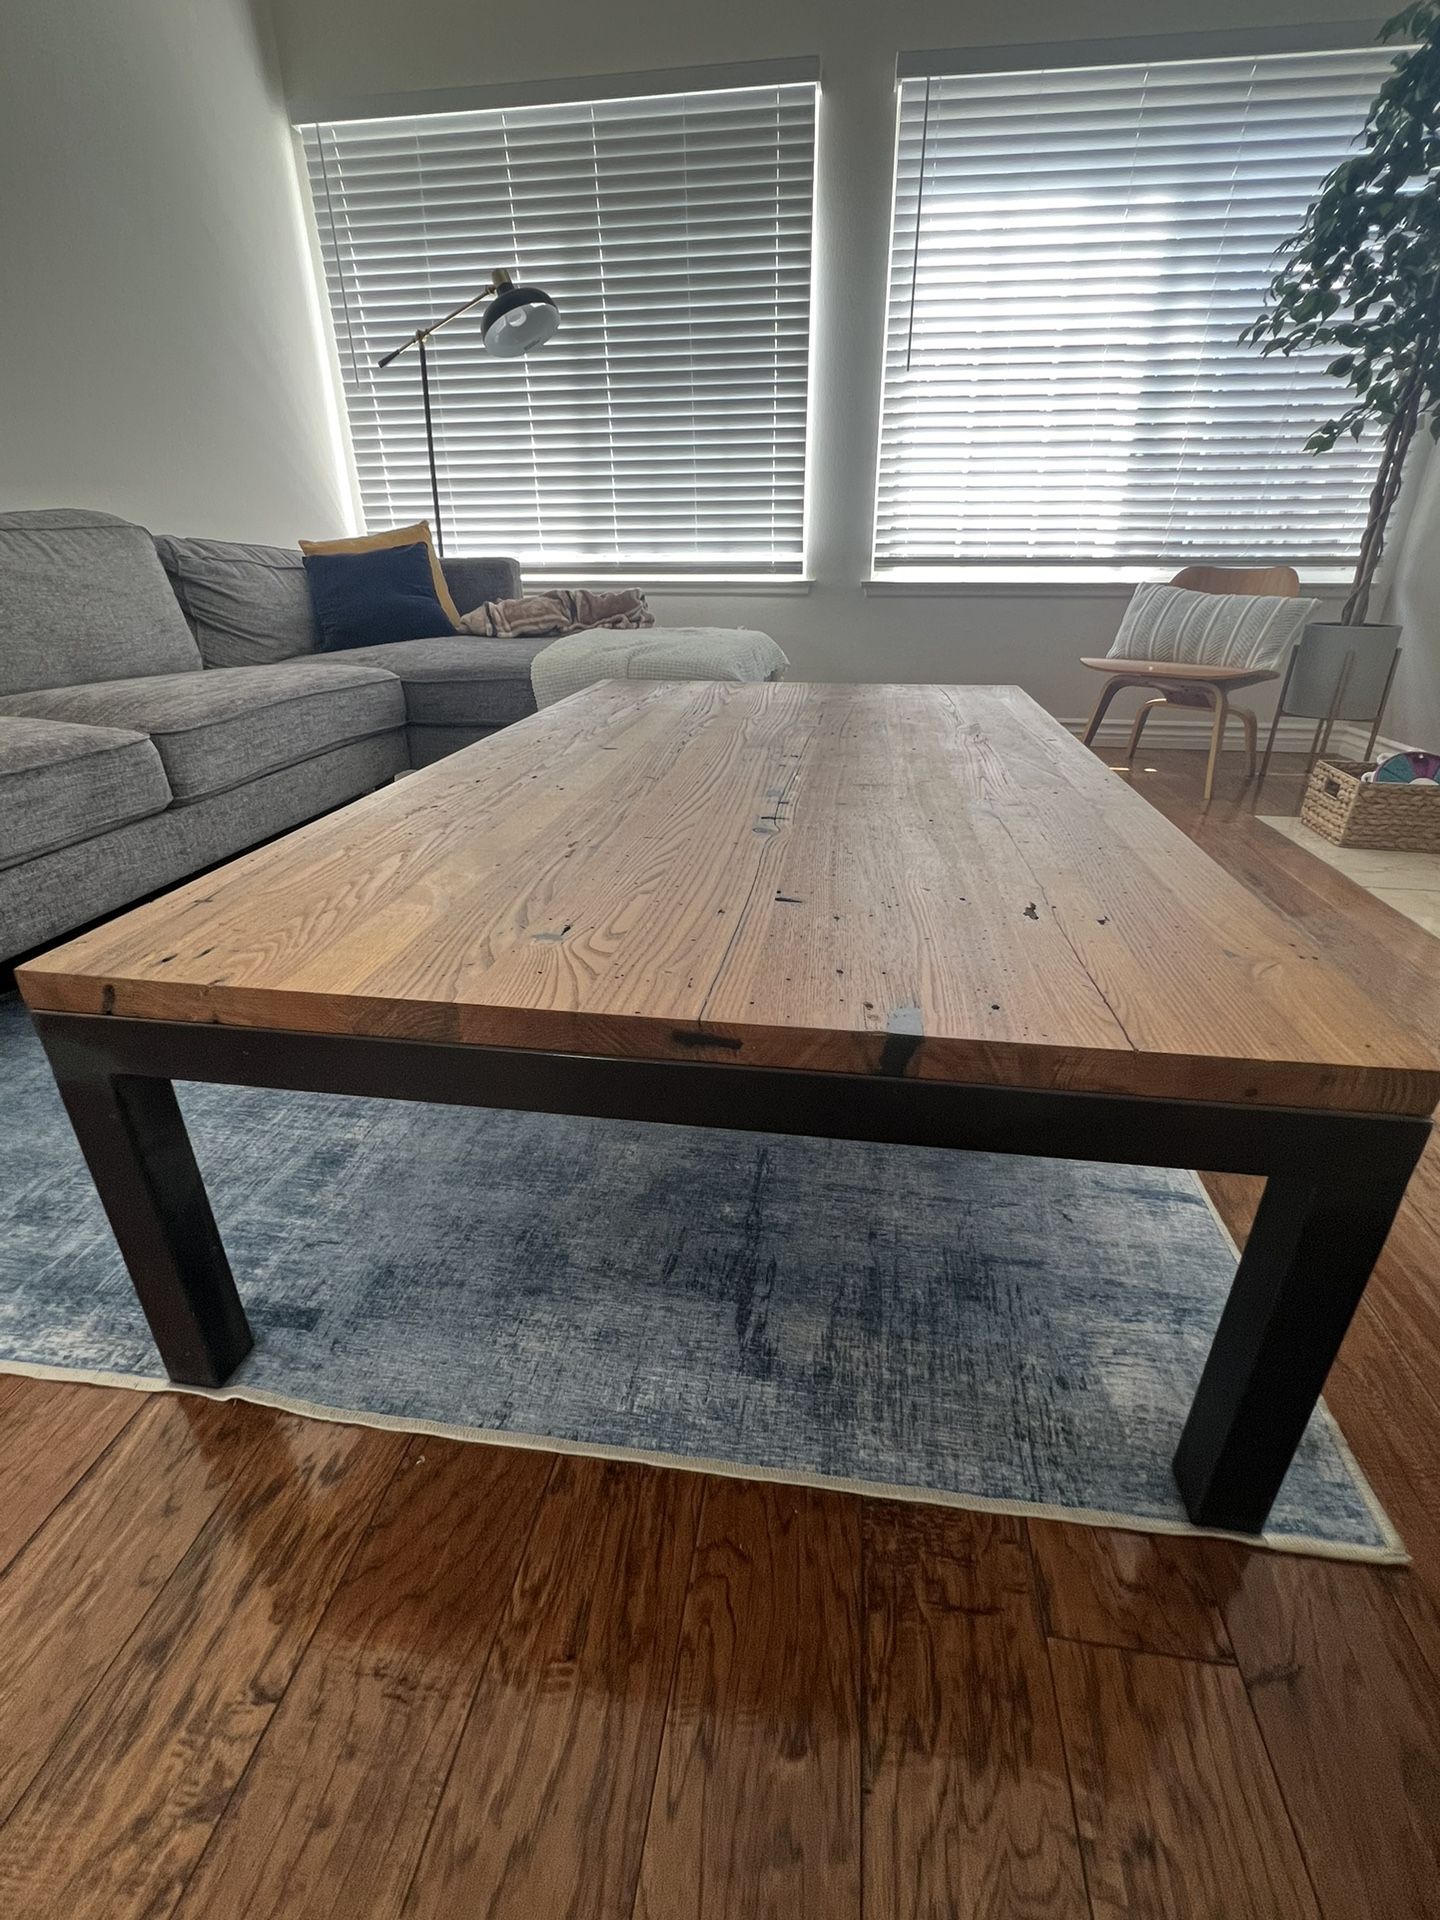 Rustic, Contemporary Coffee Table (Room and Board)